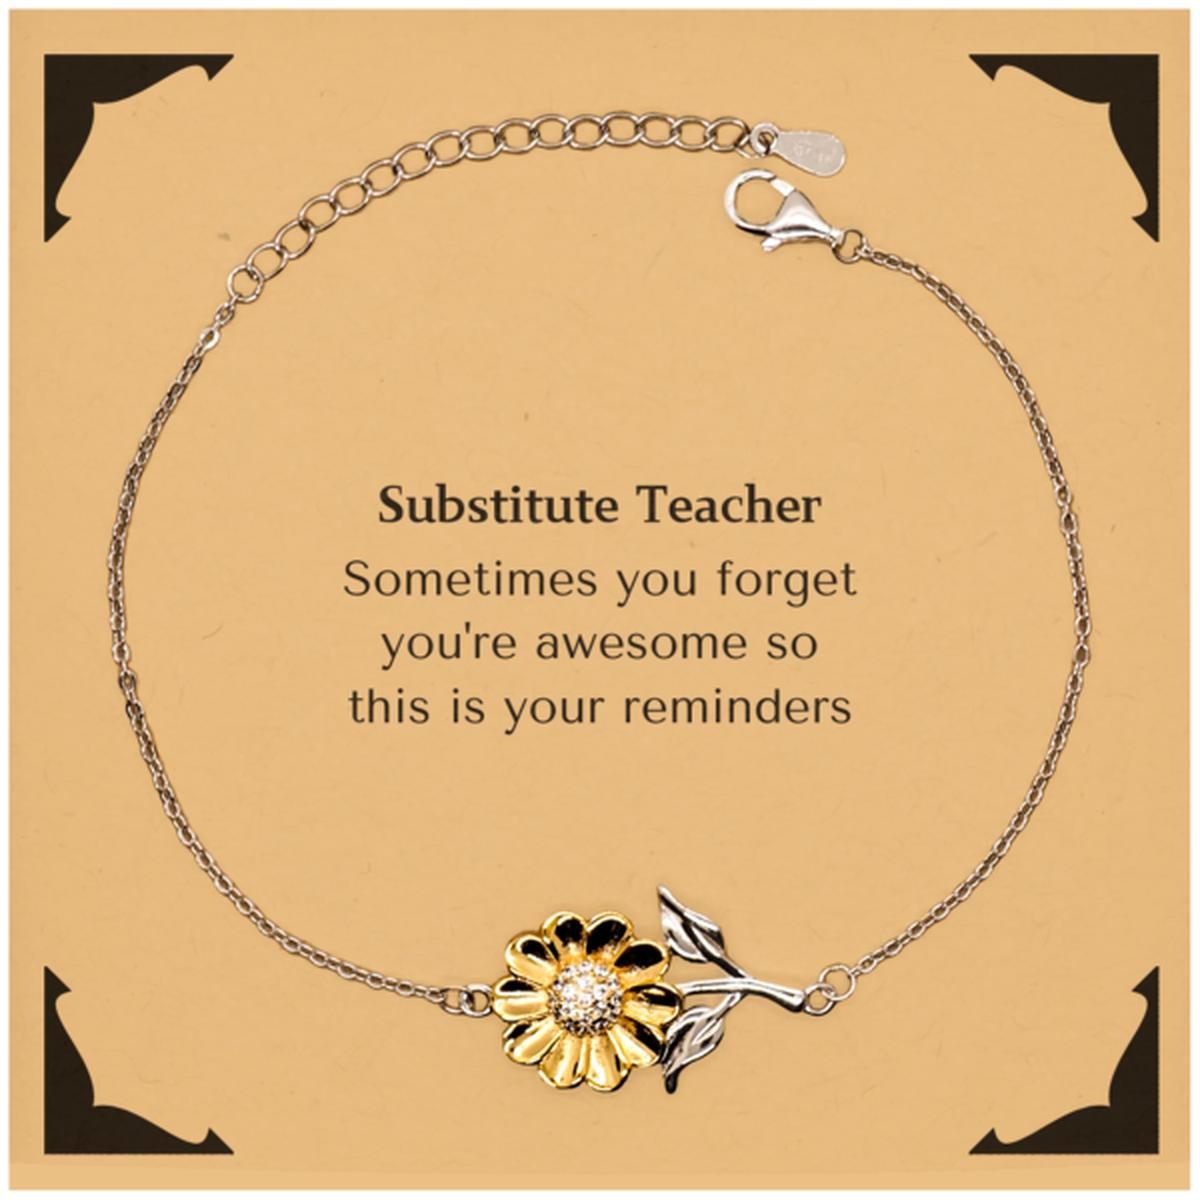 Sentimental Substitute Teacher Sunflower Bracelet, Substitute Teacher Sometimes you forget you're awesome so this is your reminders, Graduation Christmas Birthday Gifts for Substitute Teacher, Men, Women, Coworkers